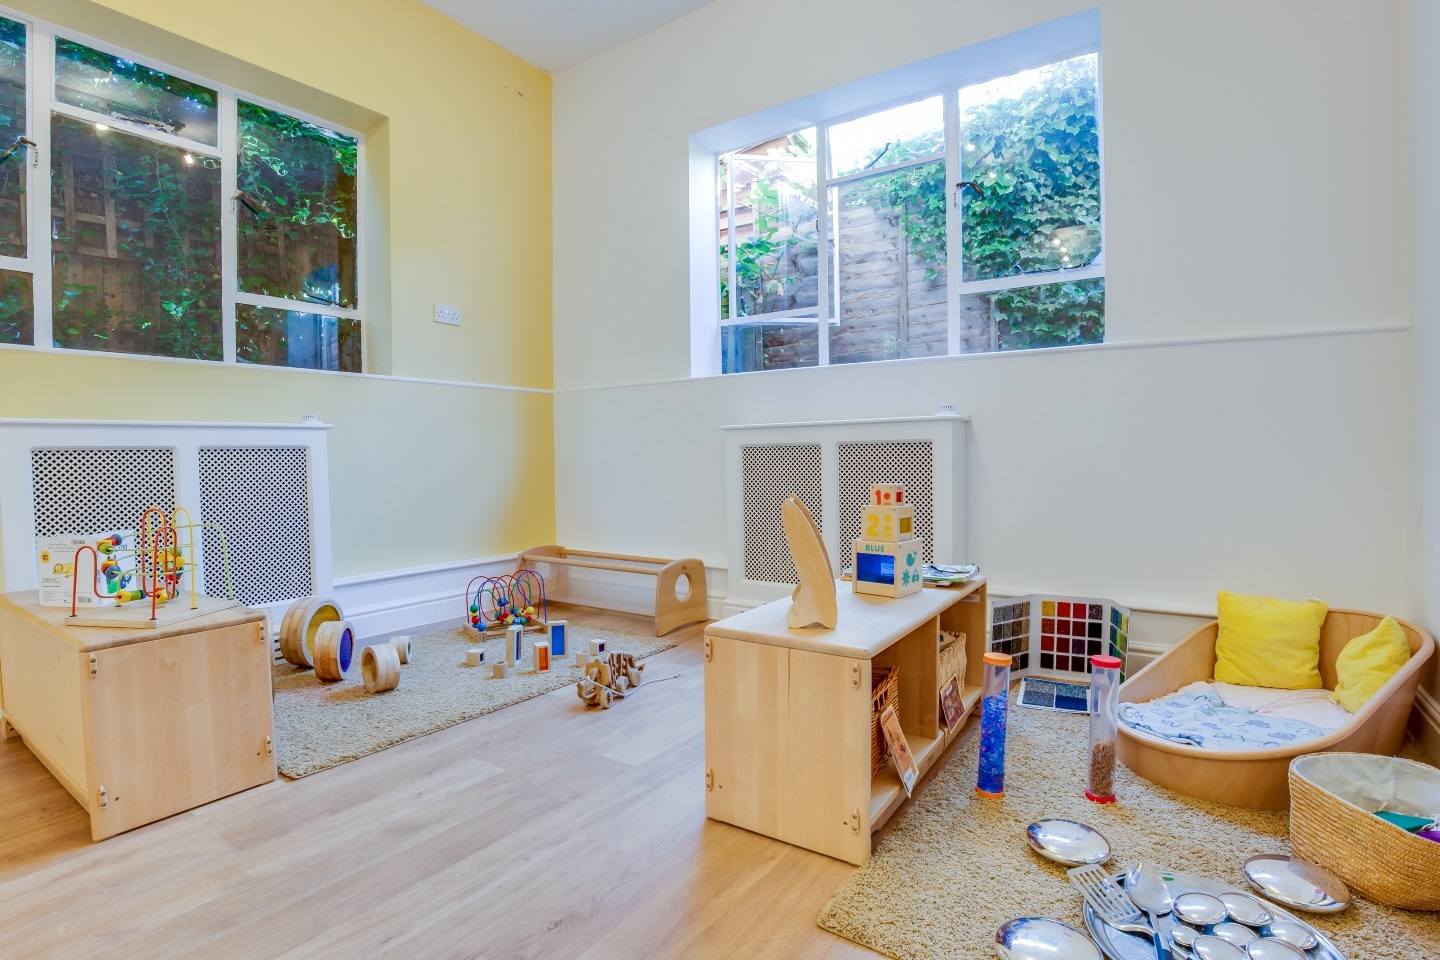 Images CLOSED Bright Horizons Esher Day Nursery and Preschool